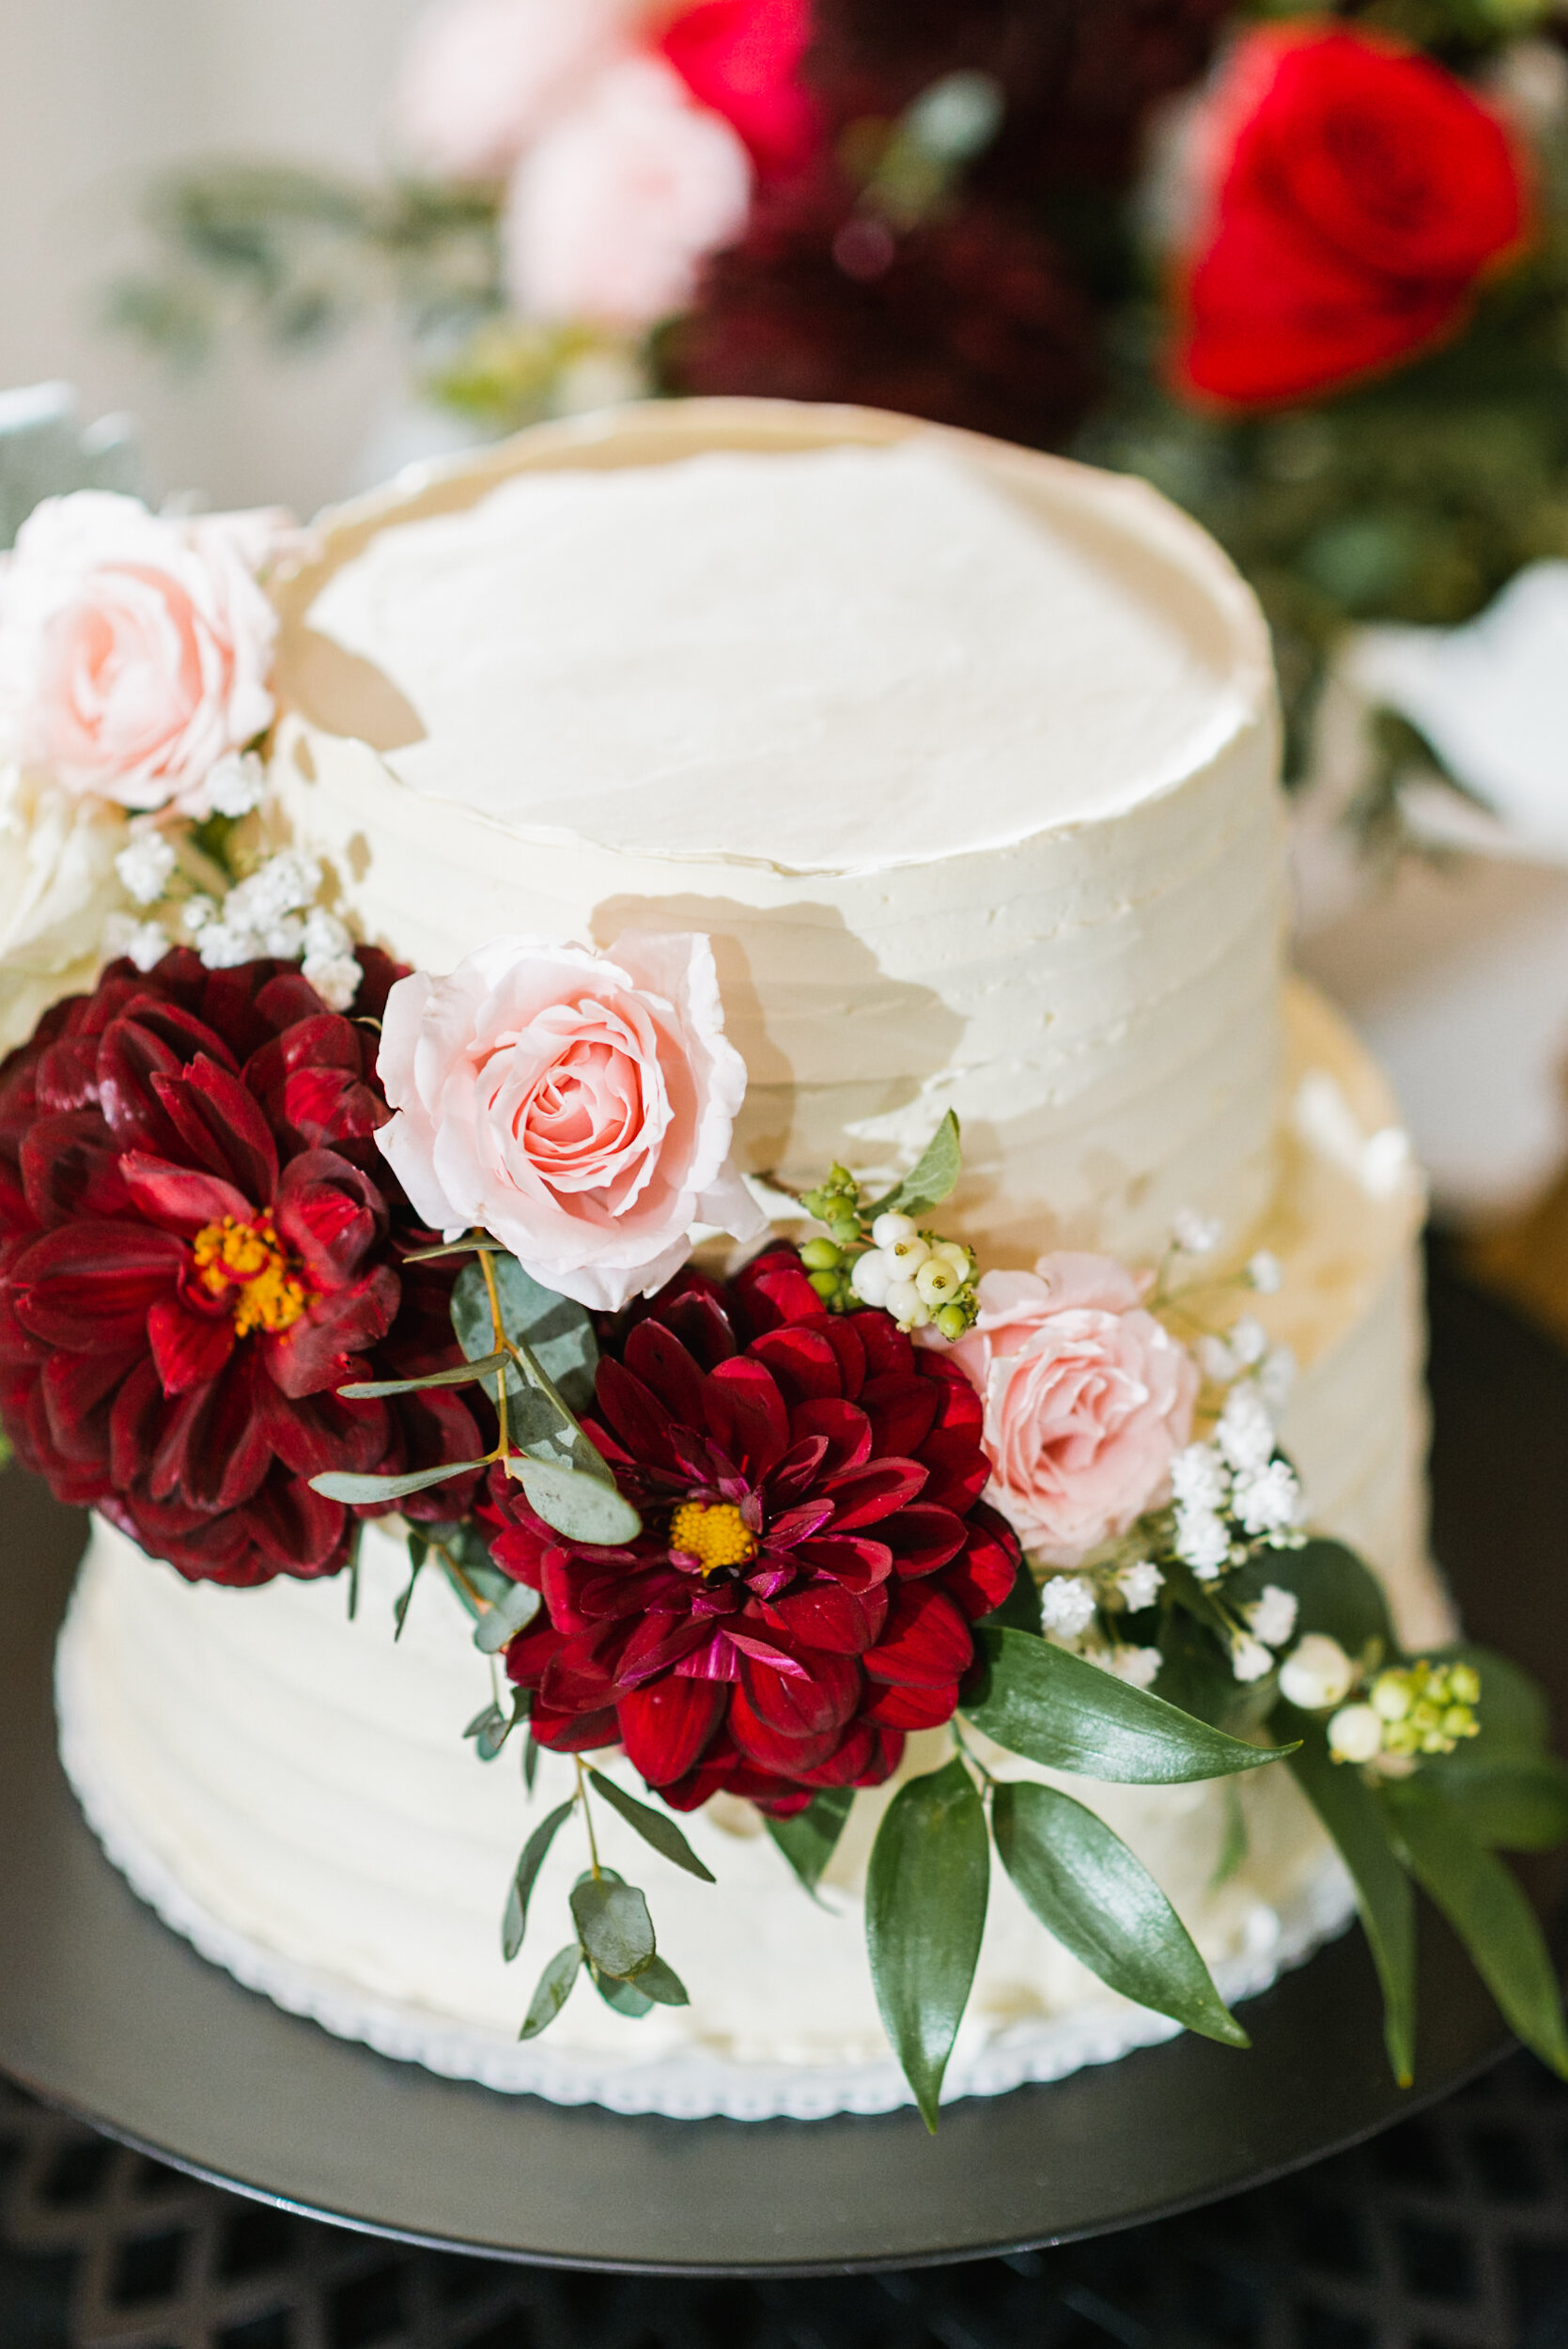 Wedding cake with red flowers